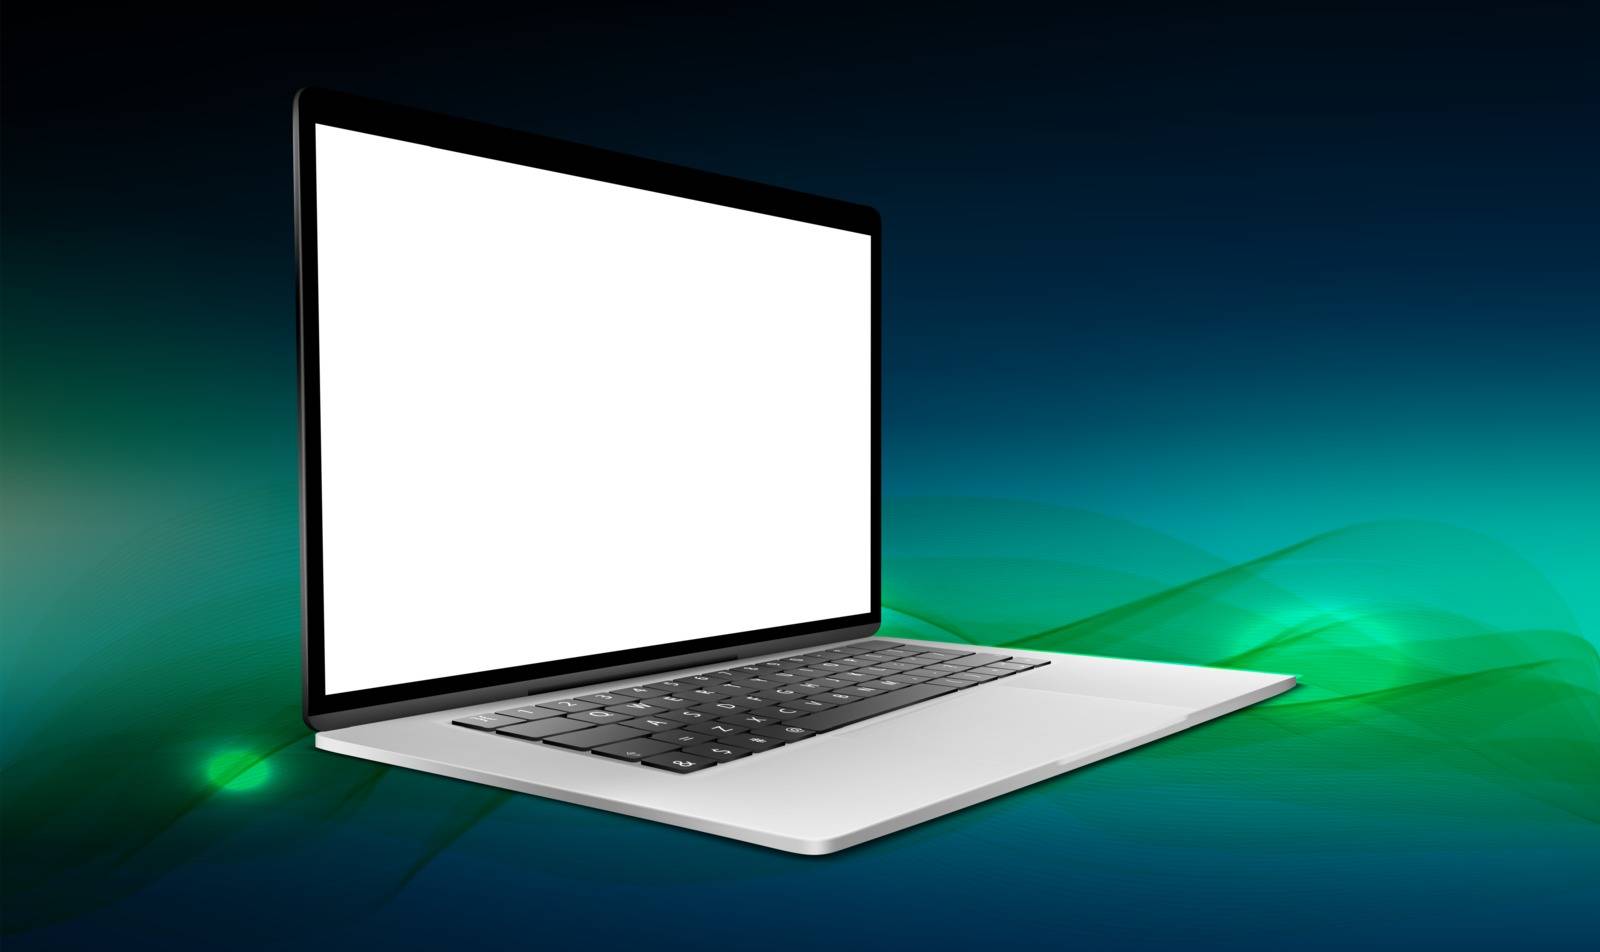 mock up illustration of laptop on abstract background